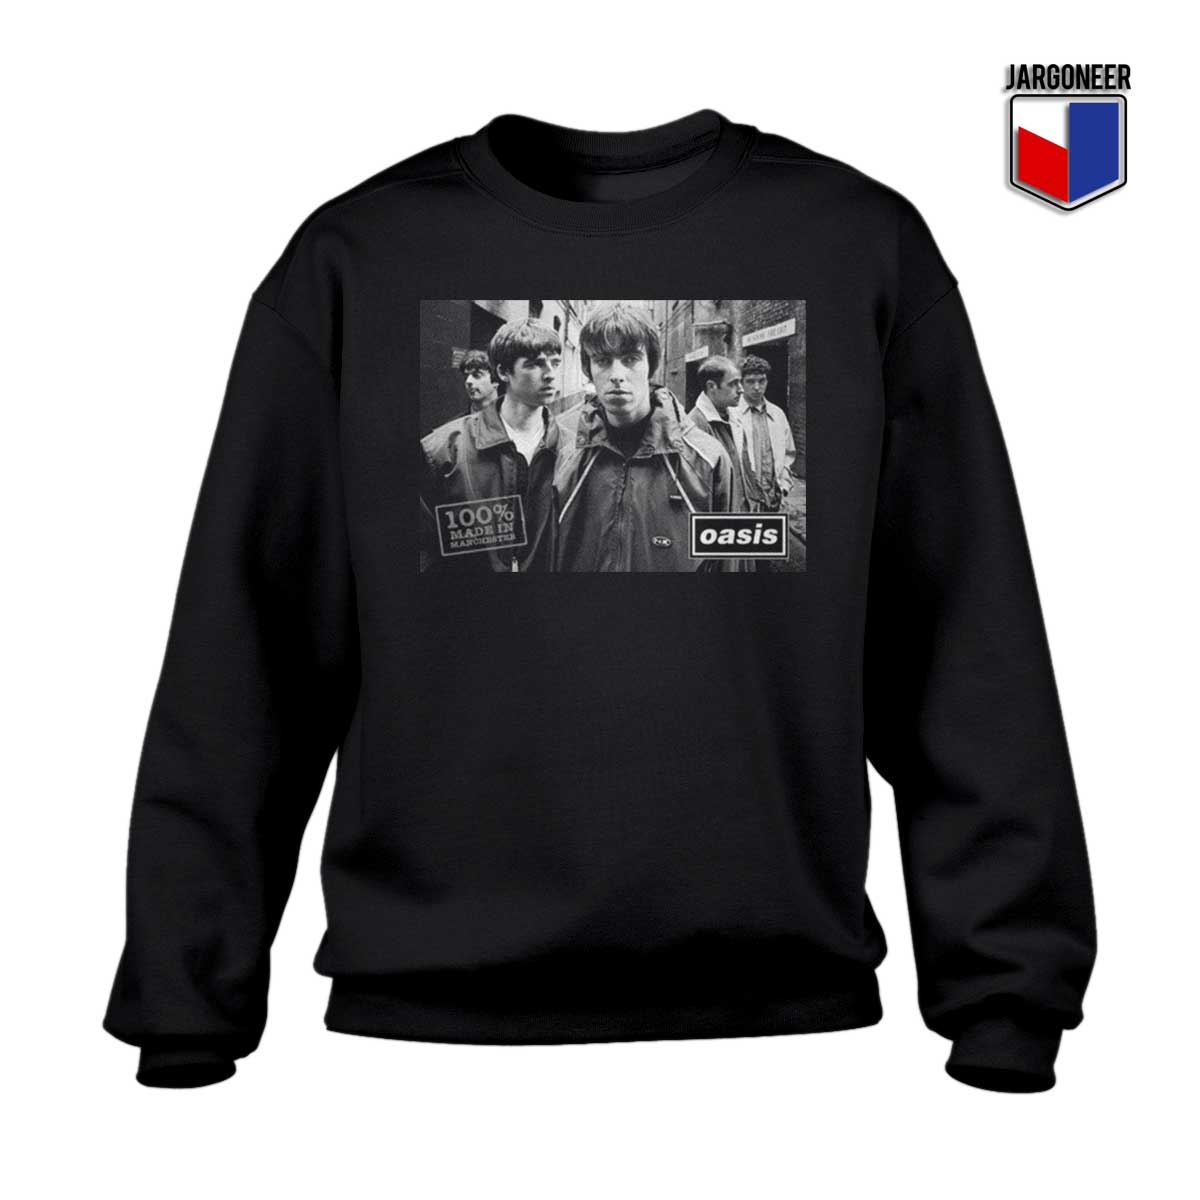 Oasis Made in Manchester Sweatshirt - Shop Unique Graphic Cool Shirt Designs